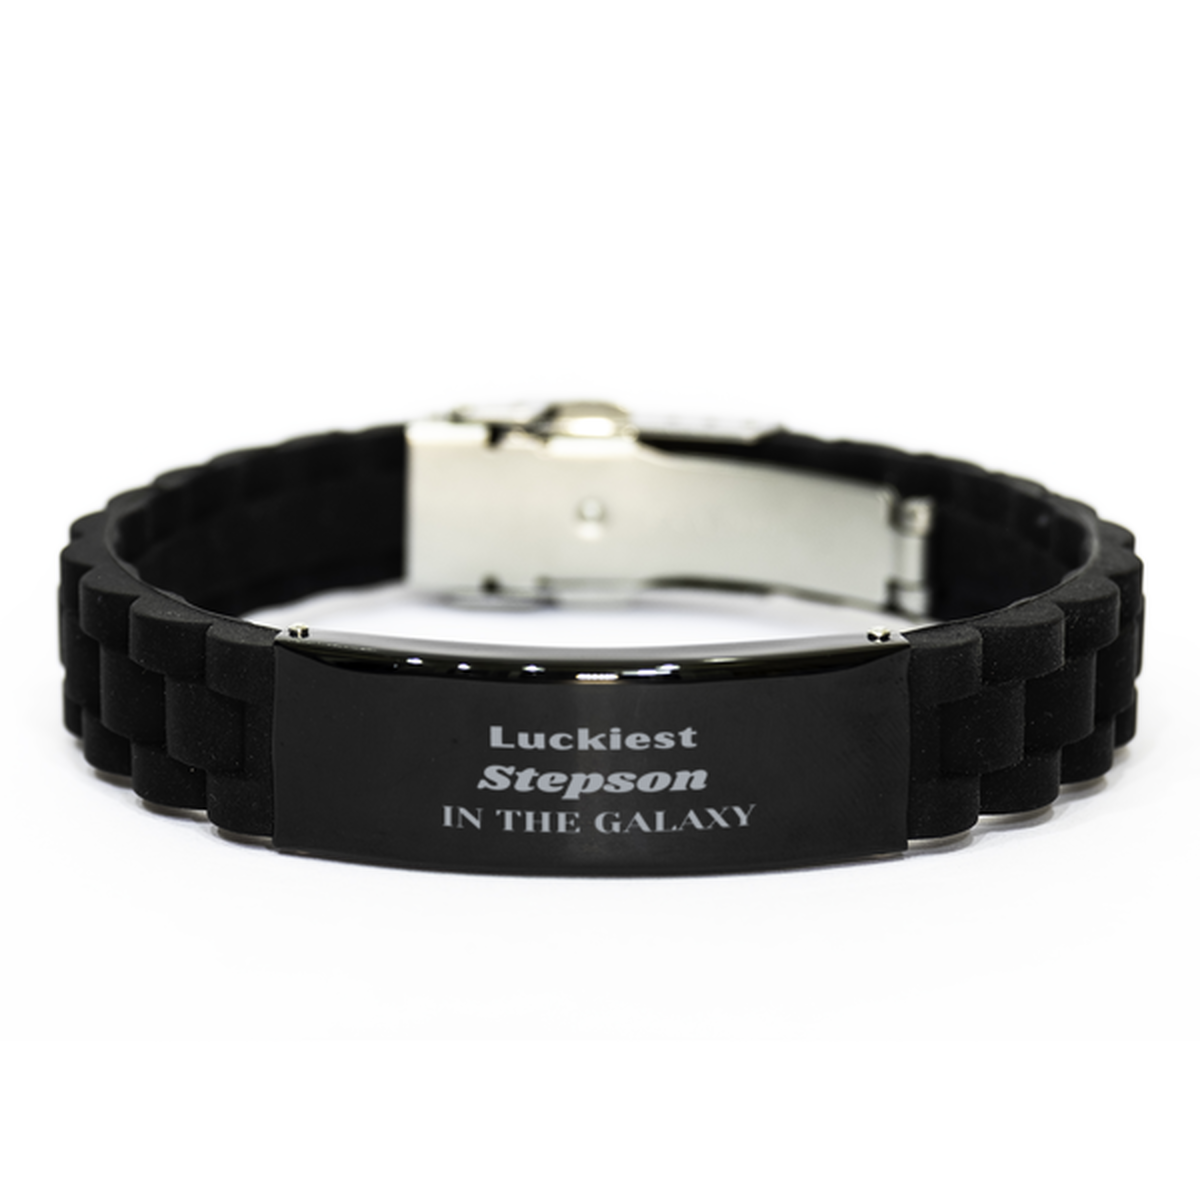 Luckiest Stepson in the Galaxy, To My Stepson Engraved Gifts, Christmas Stepson Black Glidelock Clasp Bracelet Gifts, X-mas Birthday Unique Gifts For Stepson Men Women